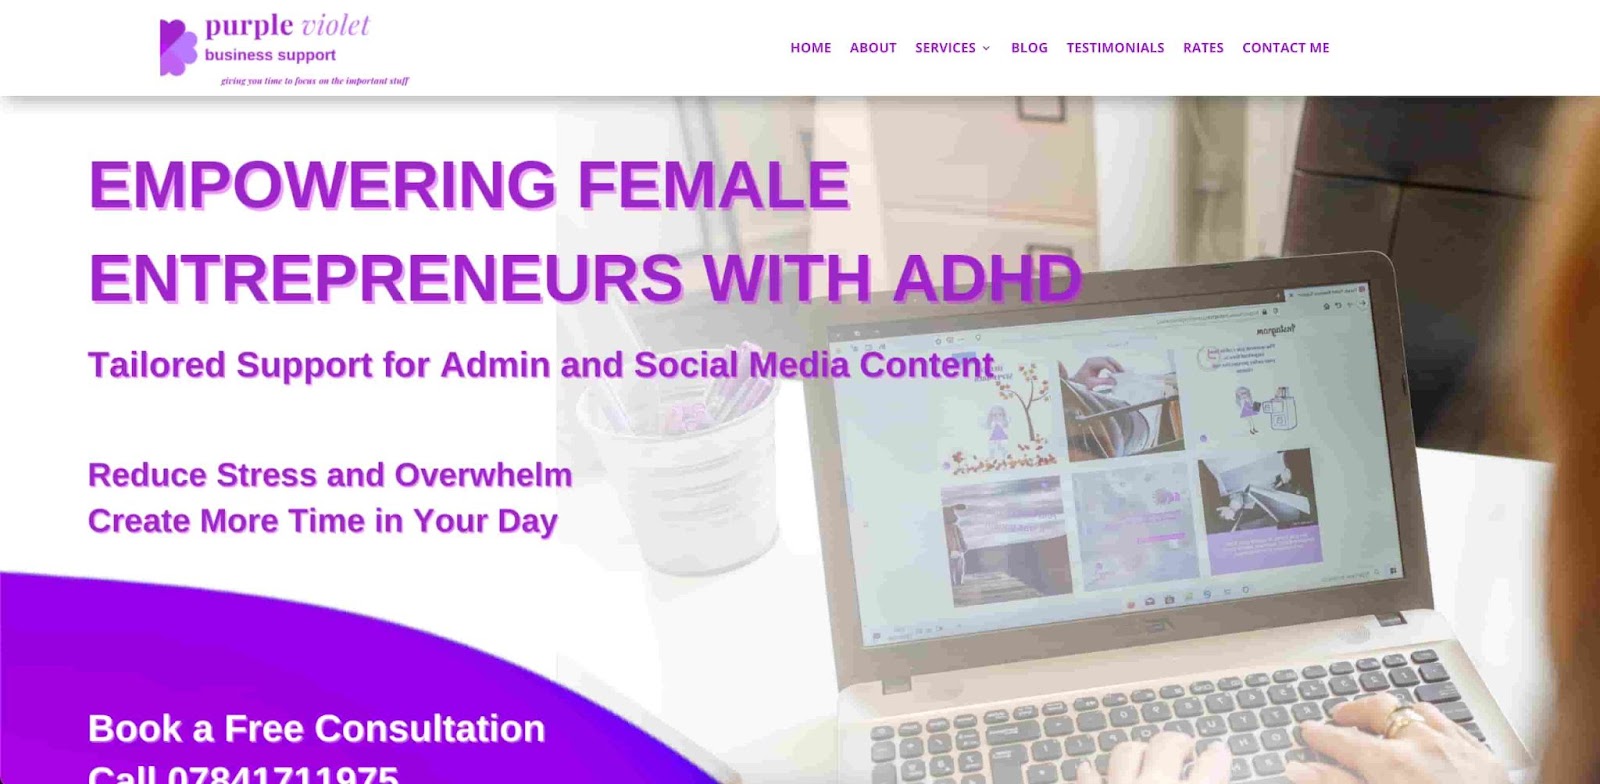 purple violet business support virtual assistant website example